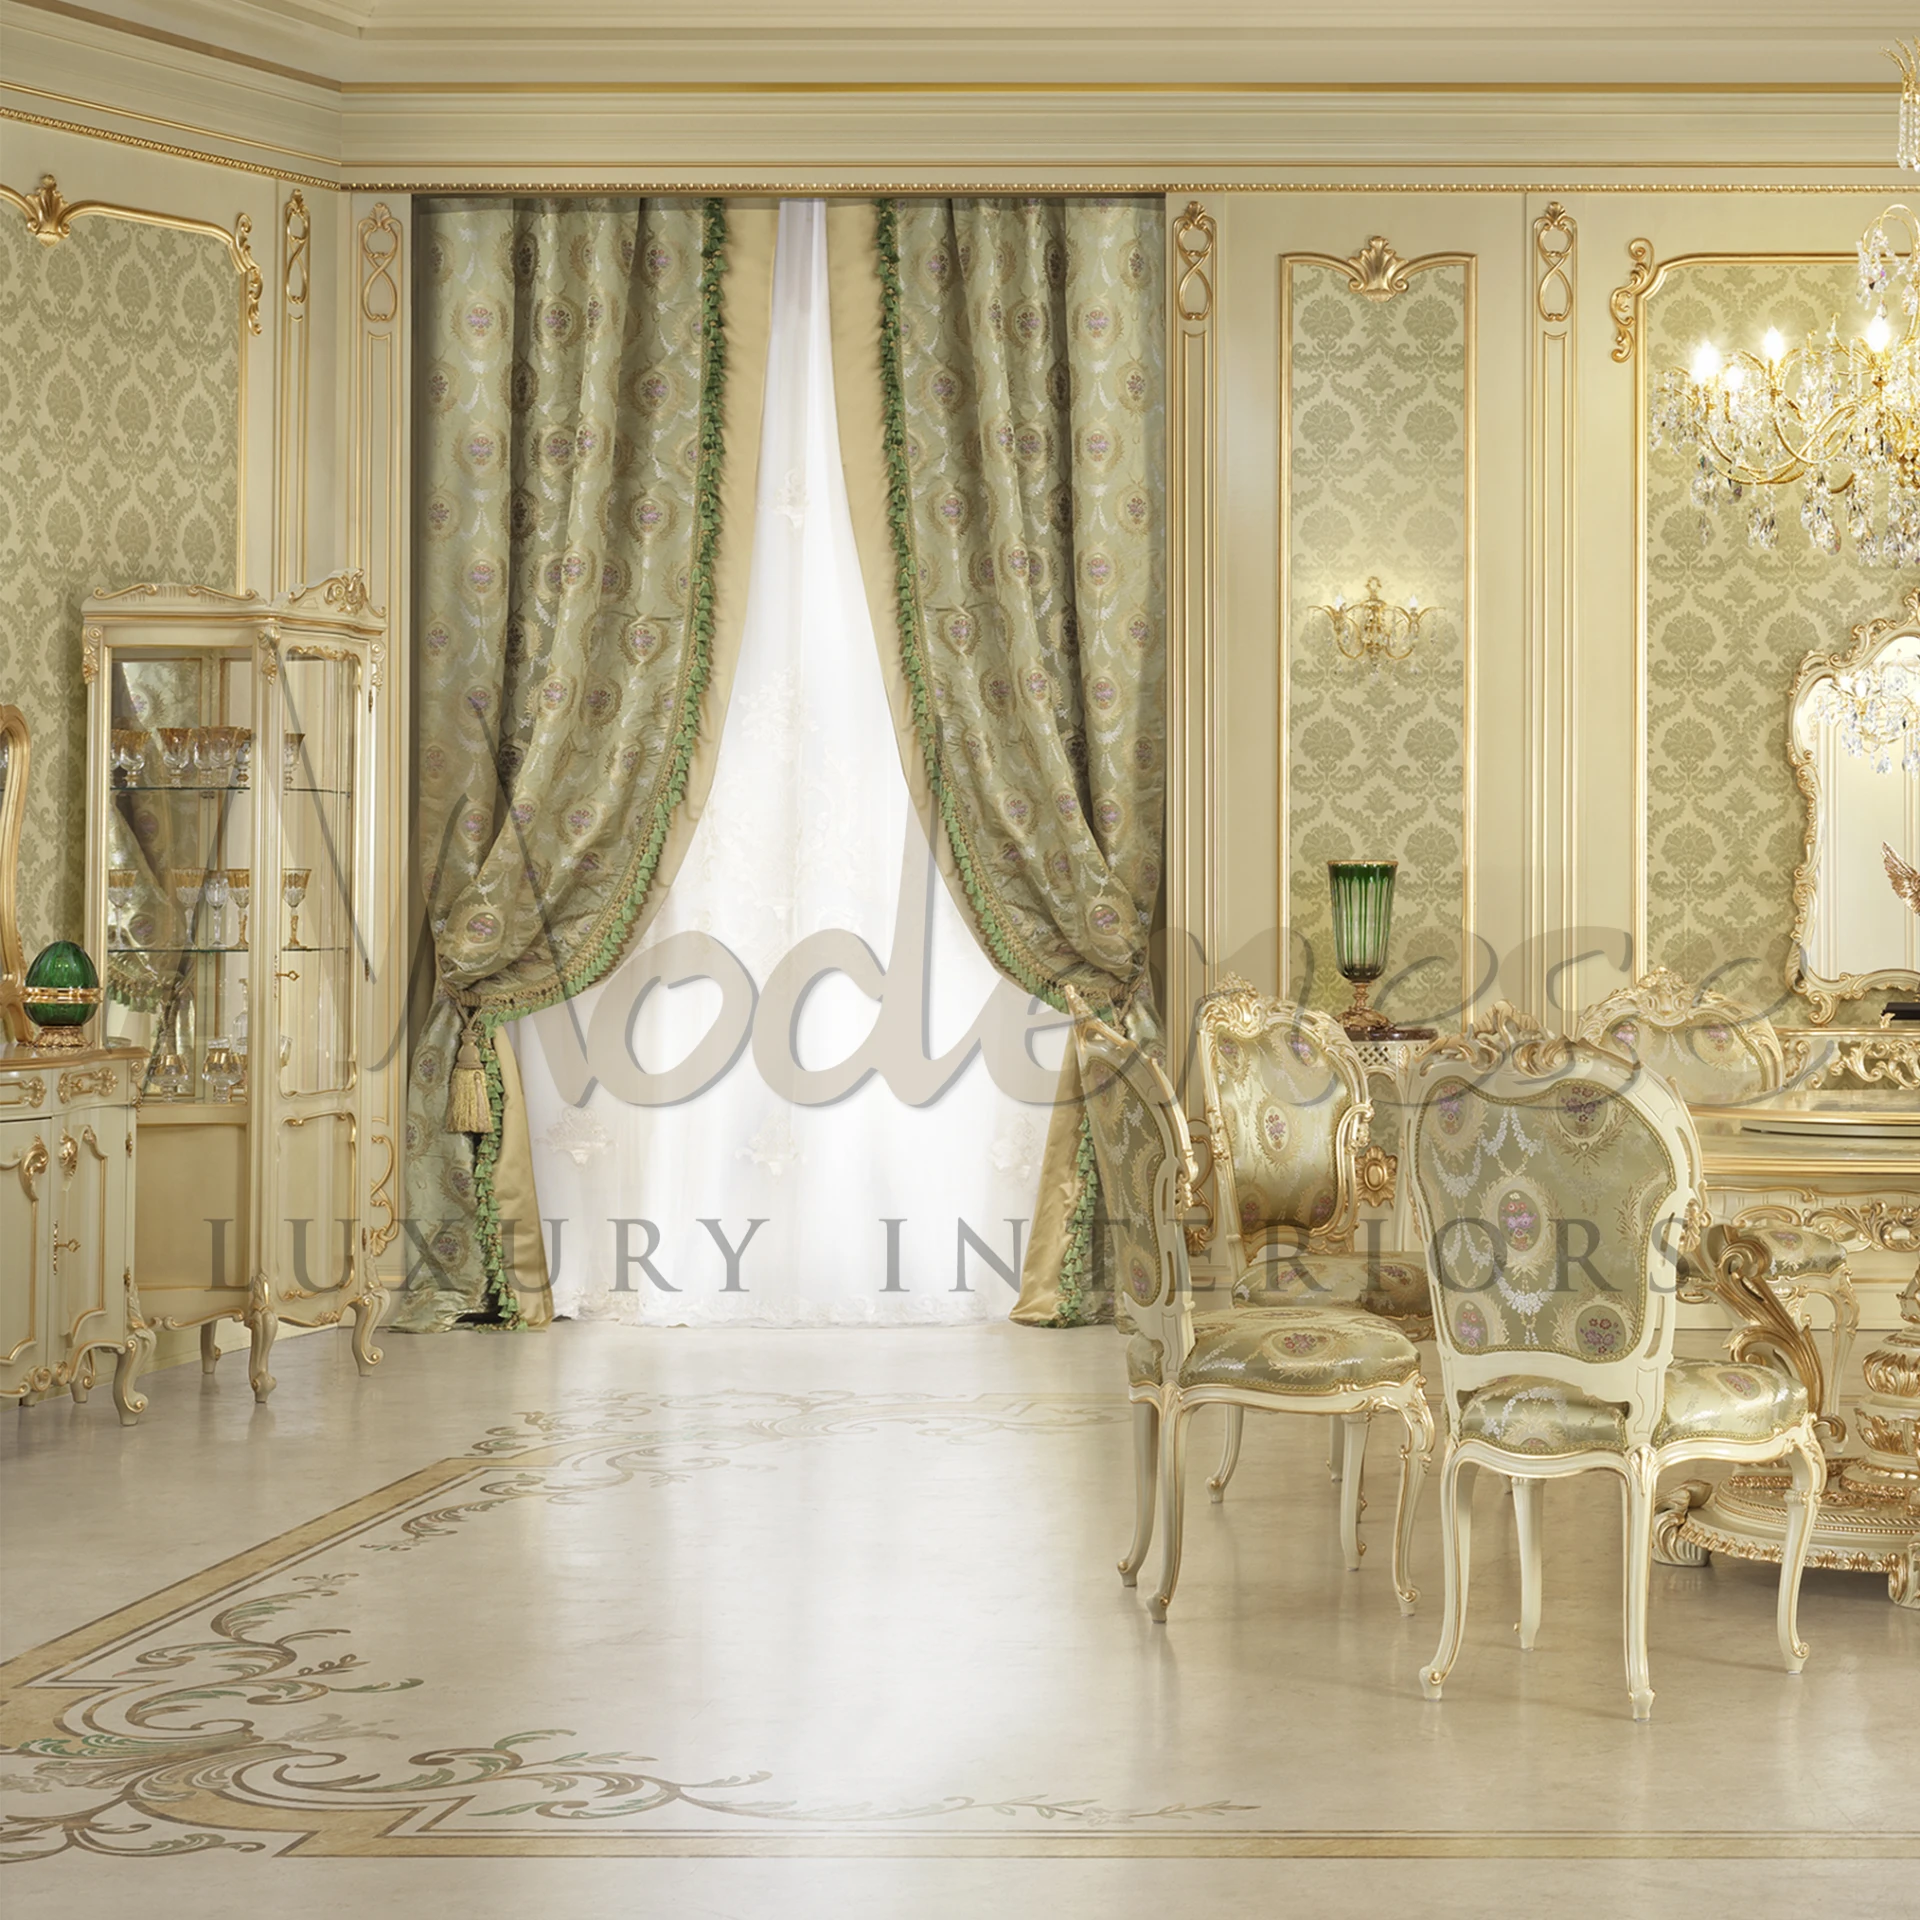 A luxurious room with green patterned curtains, a shiny glass cabinet, victorian style sideboard and fancy chairs with gold frames